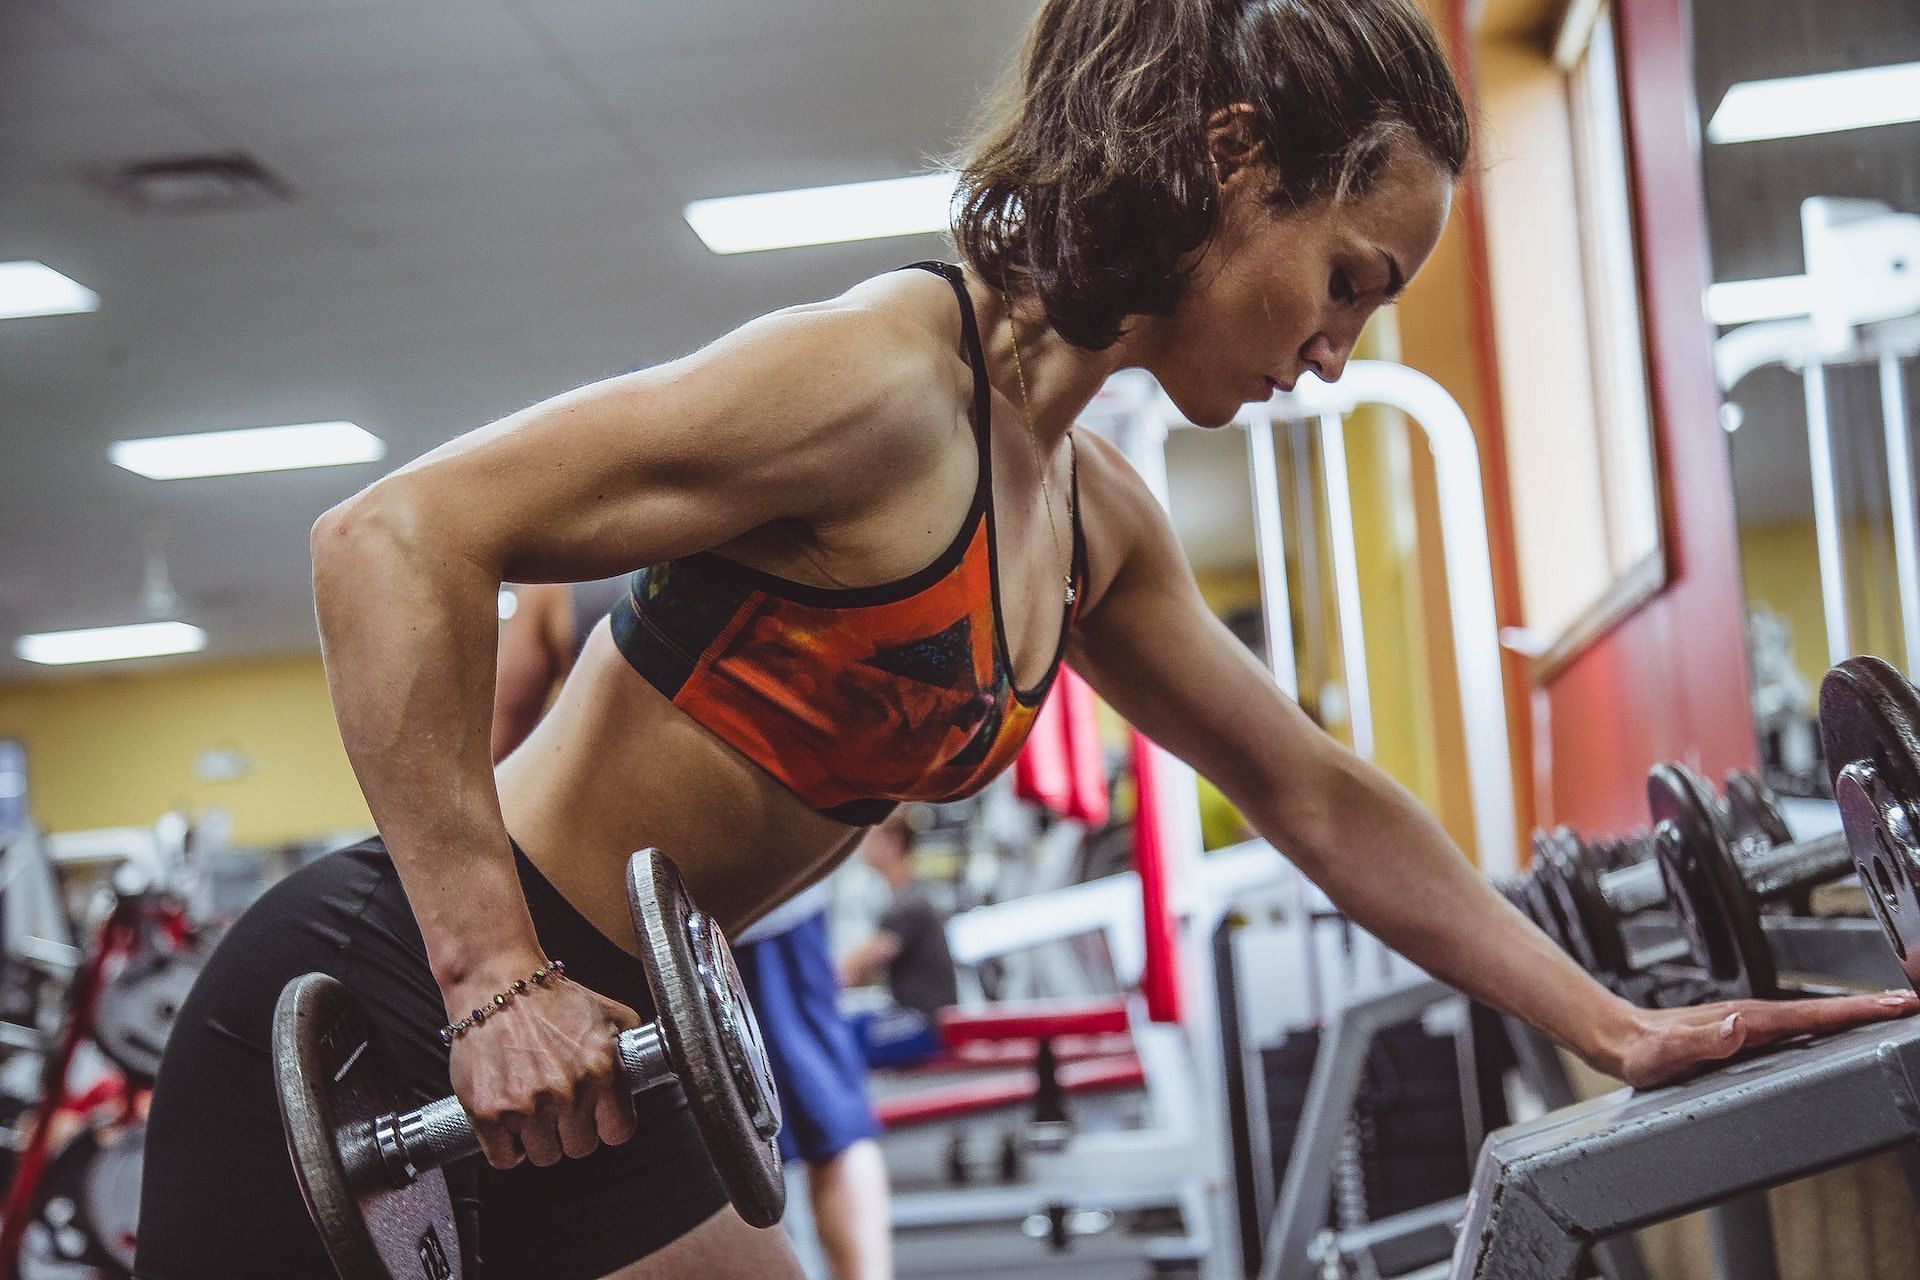 Lifting weights and muscle gain. (Image via Unsplash/ Alora Griffiths)